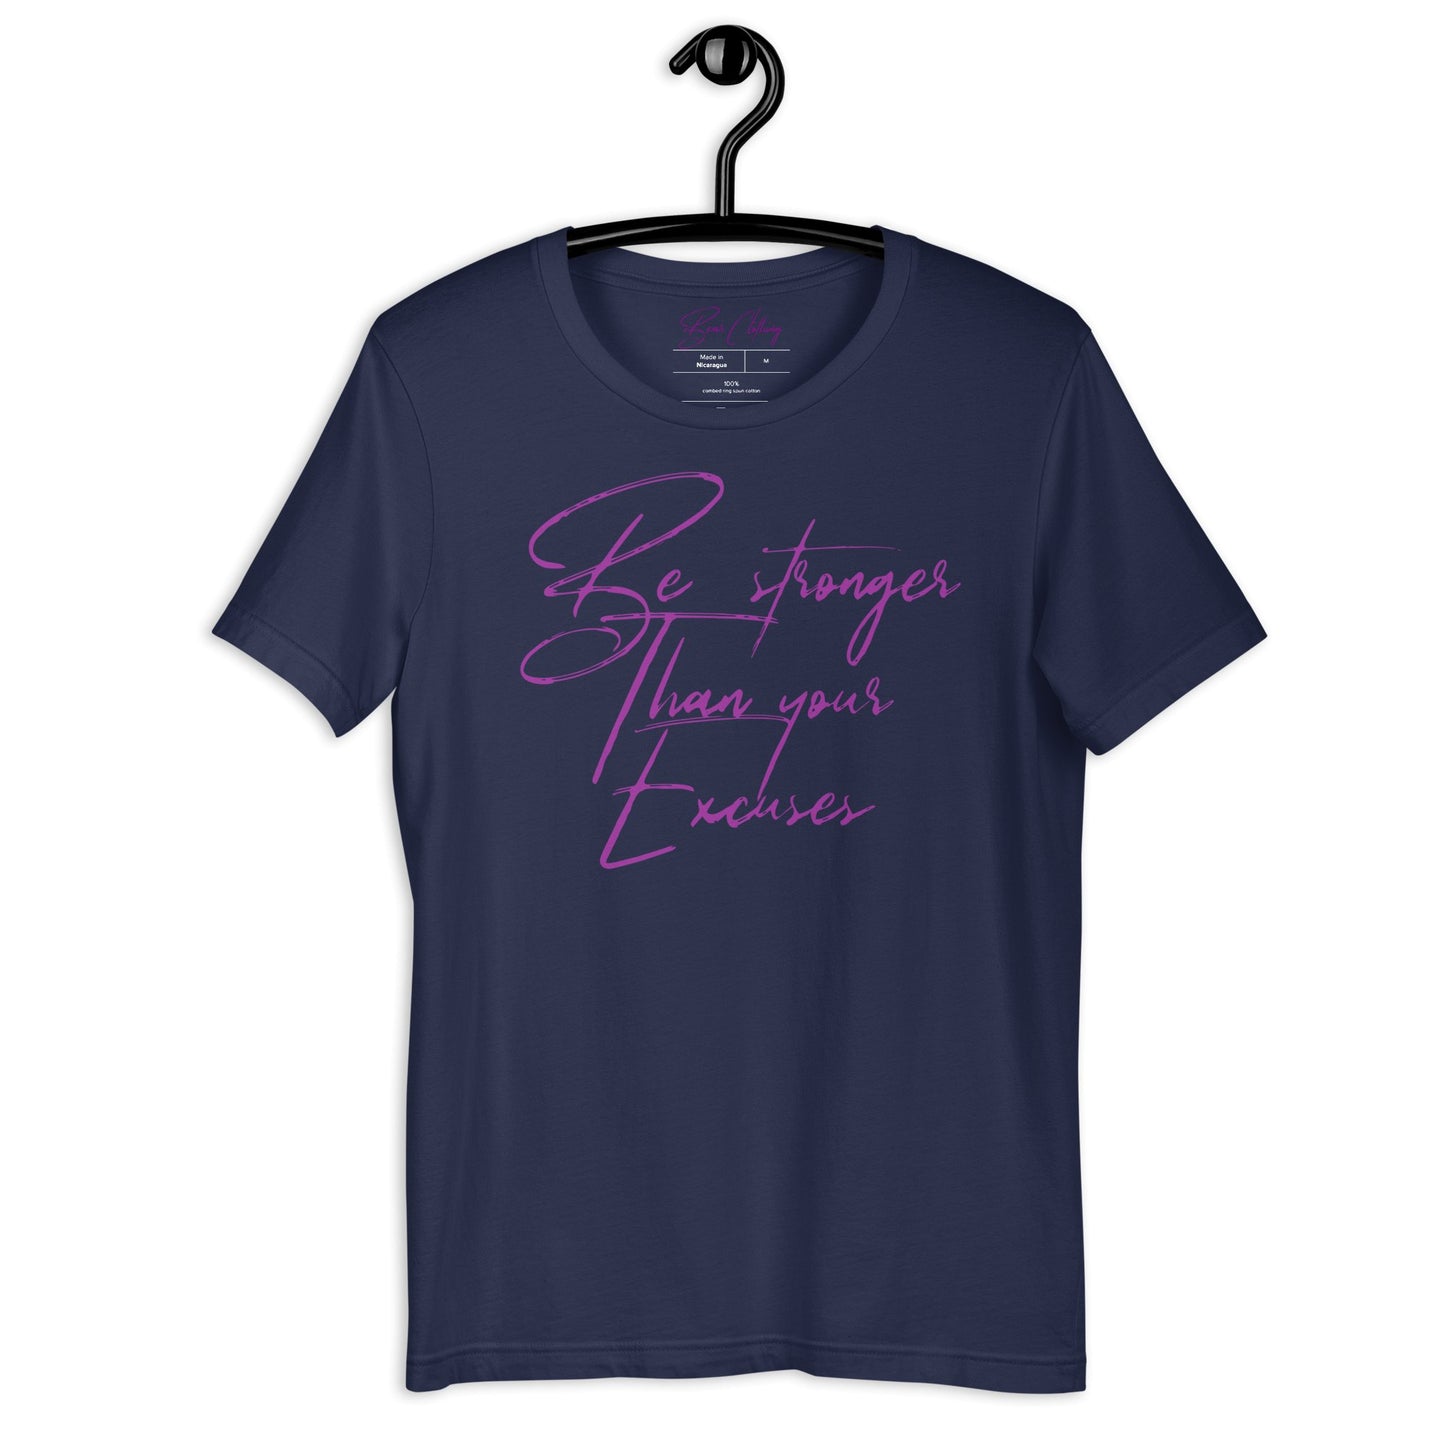 Purple Print Stronger than your excuses tee! - Bearclothing